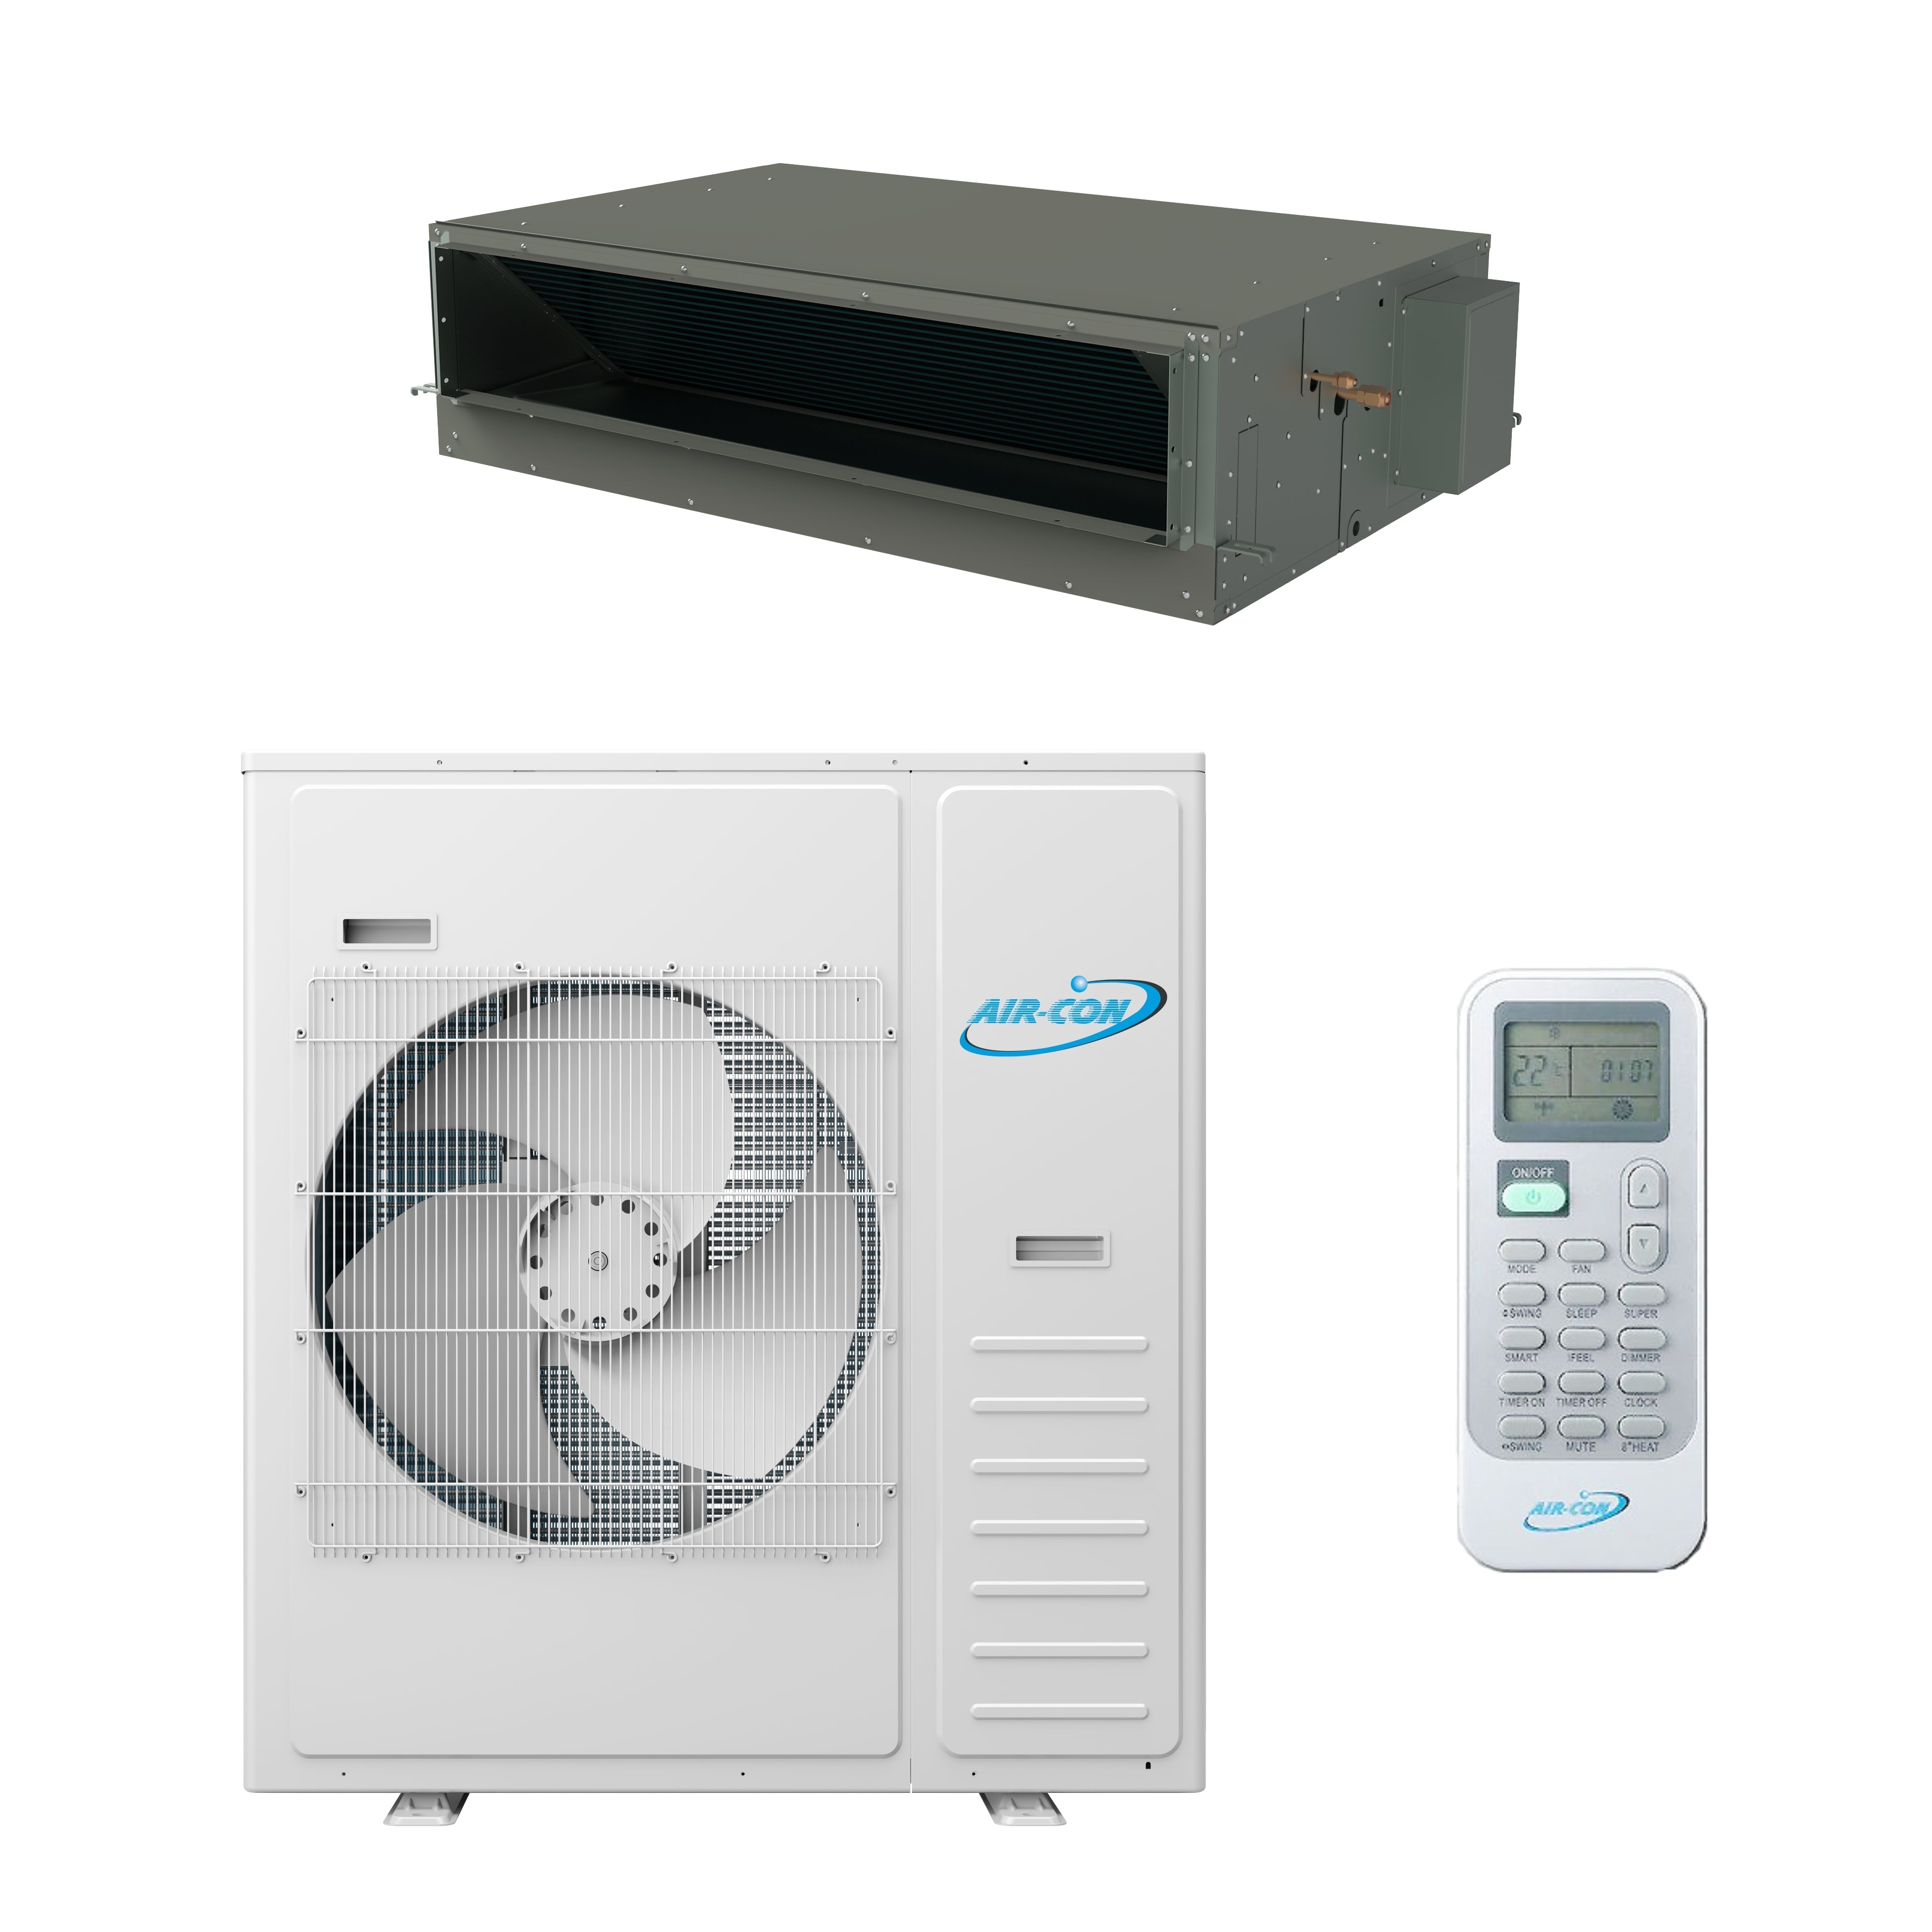 Air-Con Sky Pro Series 36,000 BTU 18 SEER Single Zone Concealed Duct Mini Split Air Conditioner and Heater System